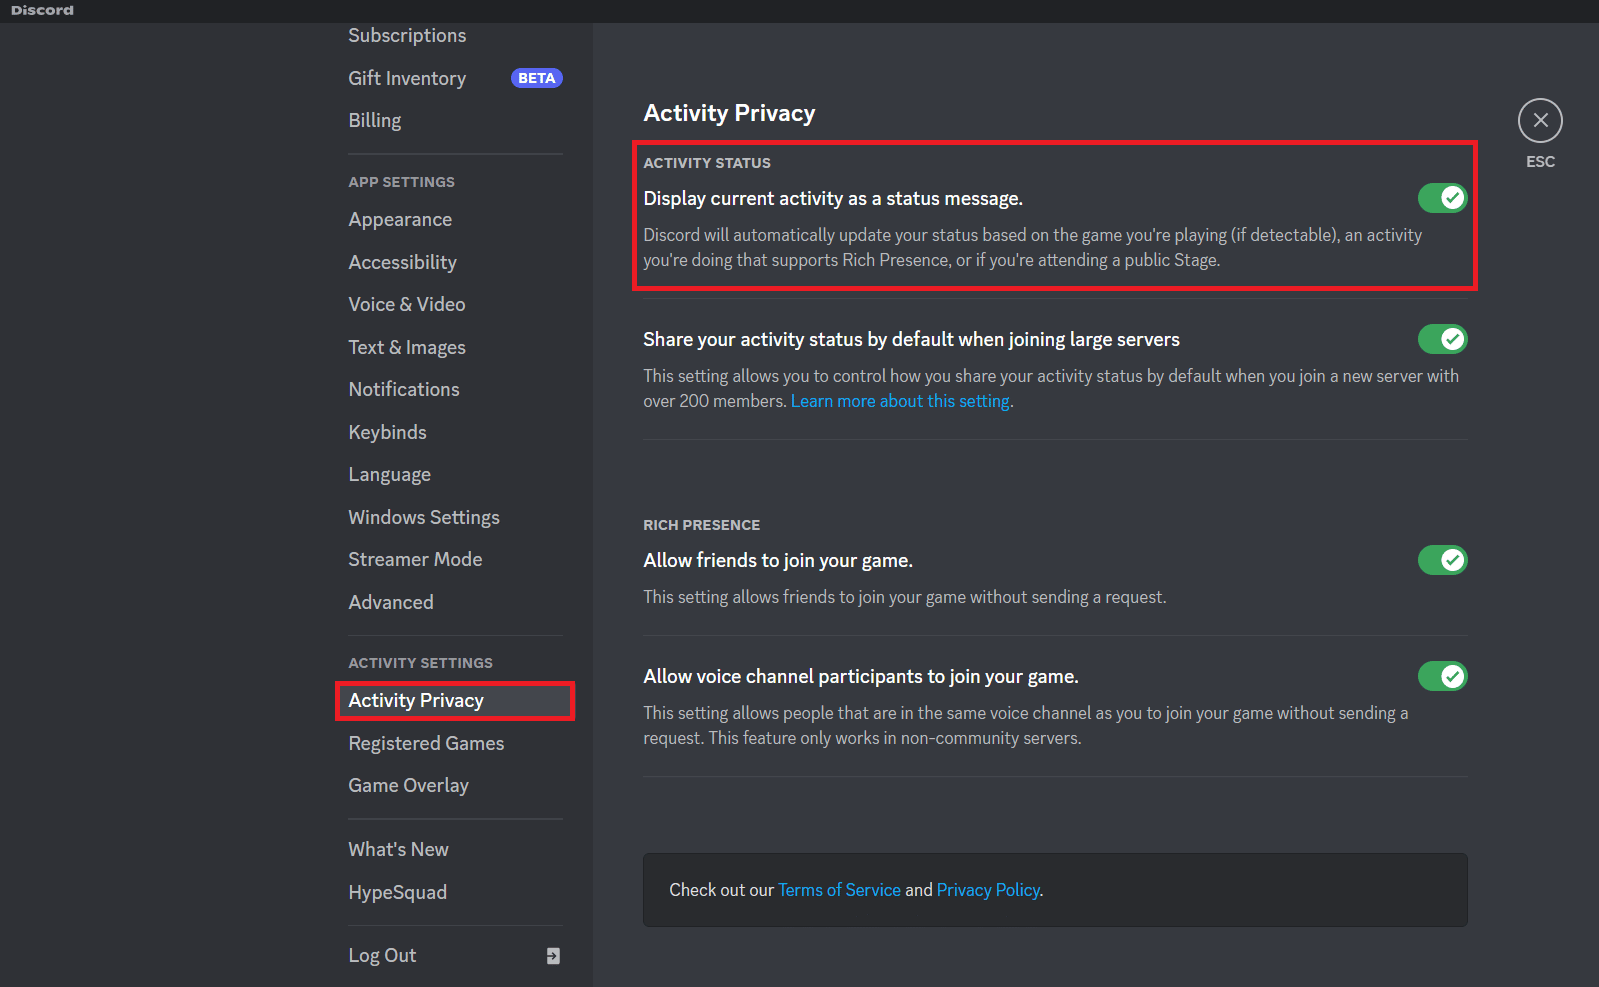 Enable the option Display current activity as a Status Message